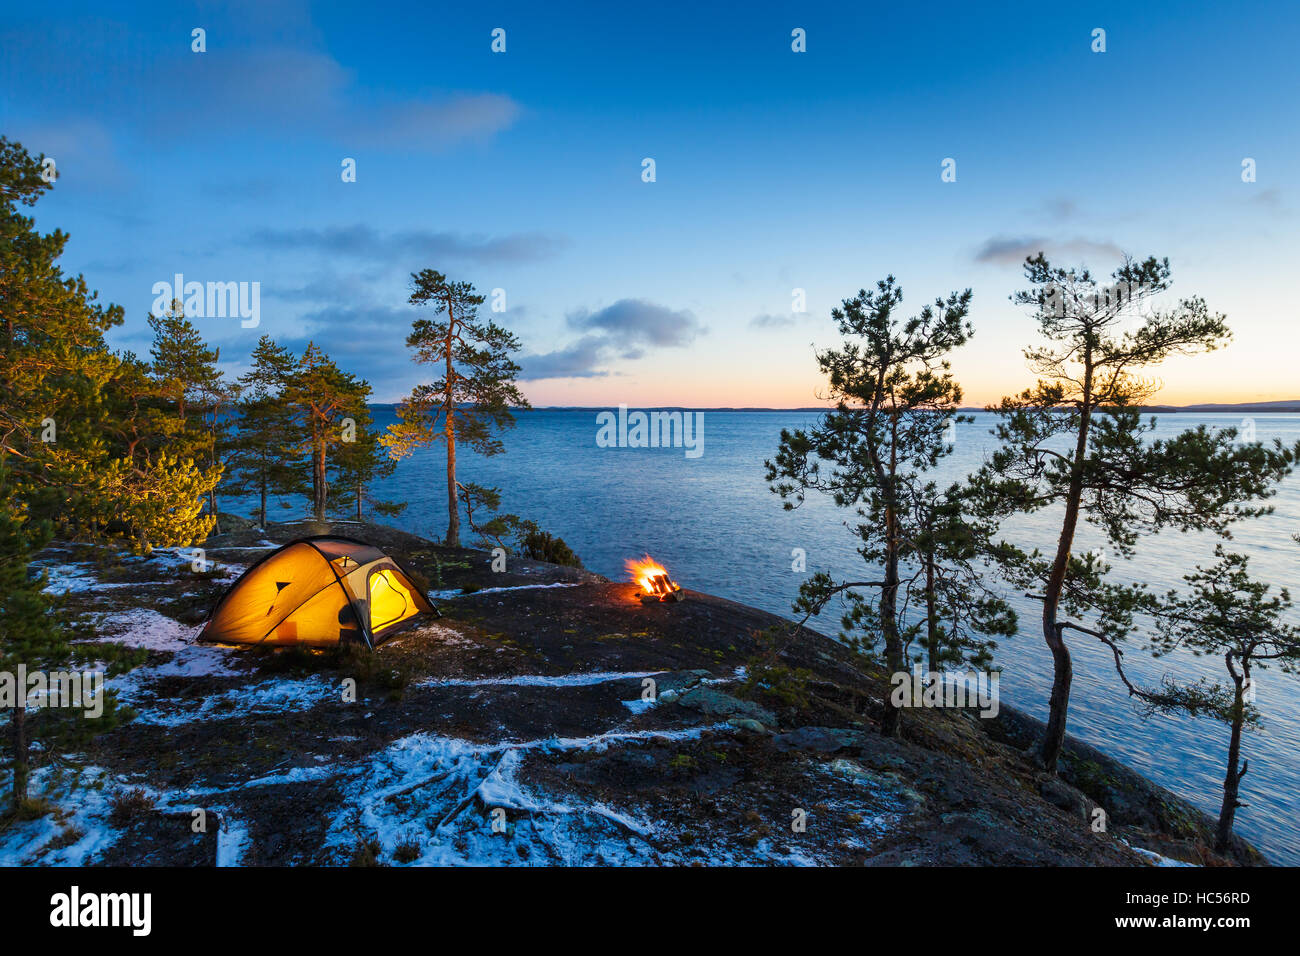 Campfire and tent in wilderness by the lakeside at the sunset, snow on the ground Stock Photo